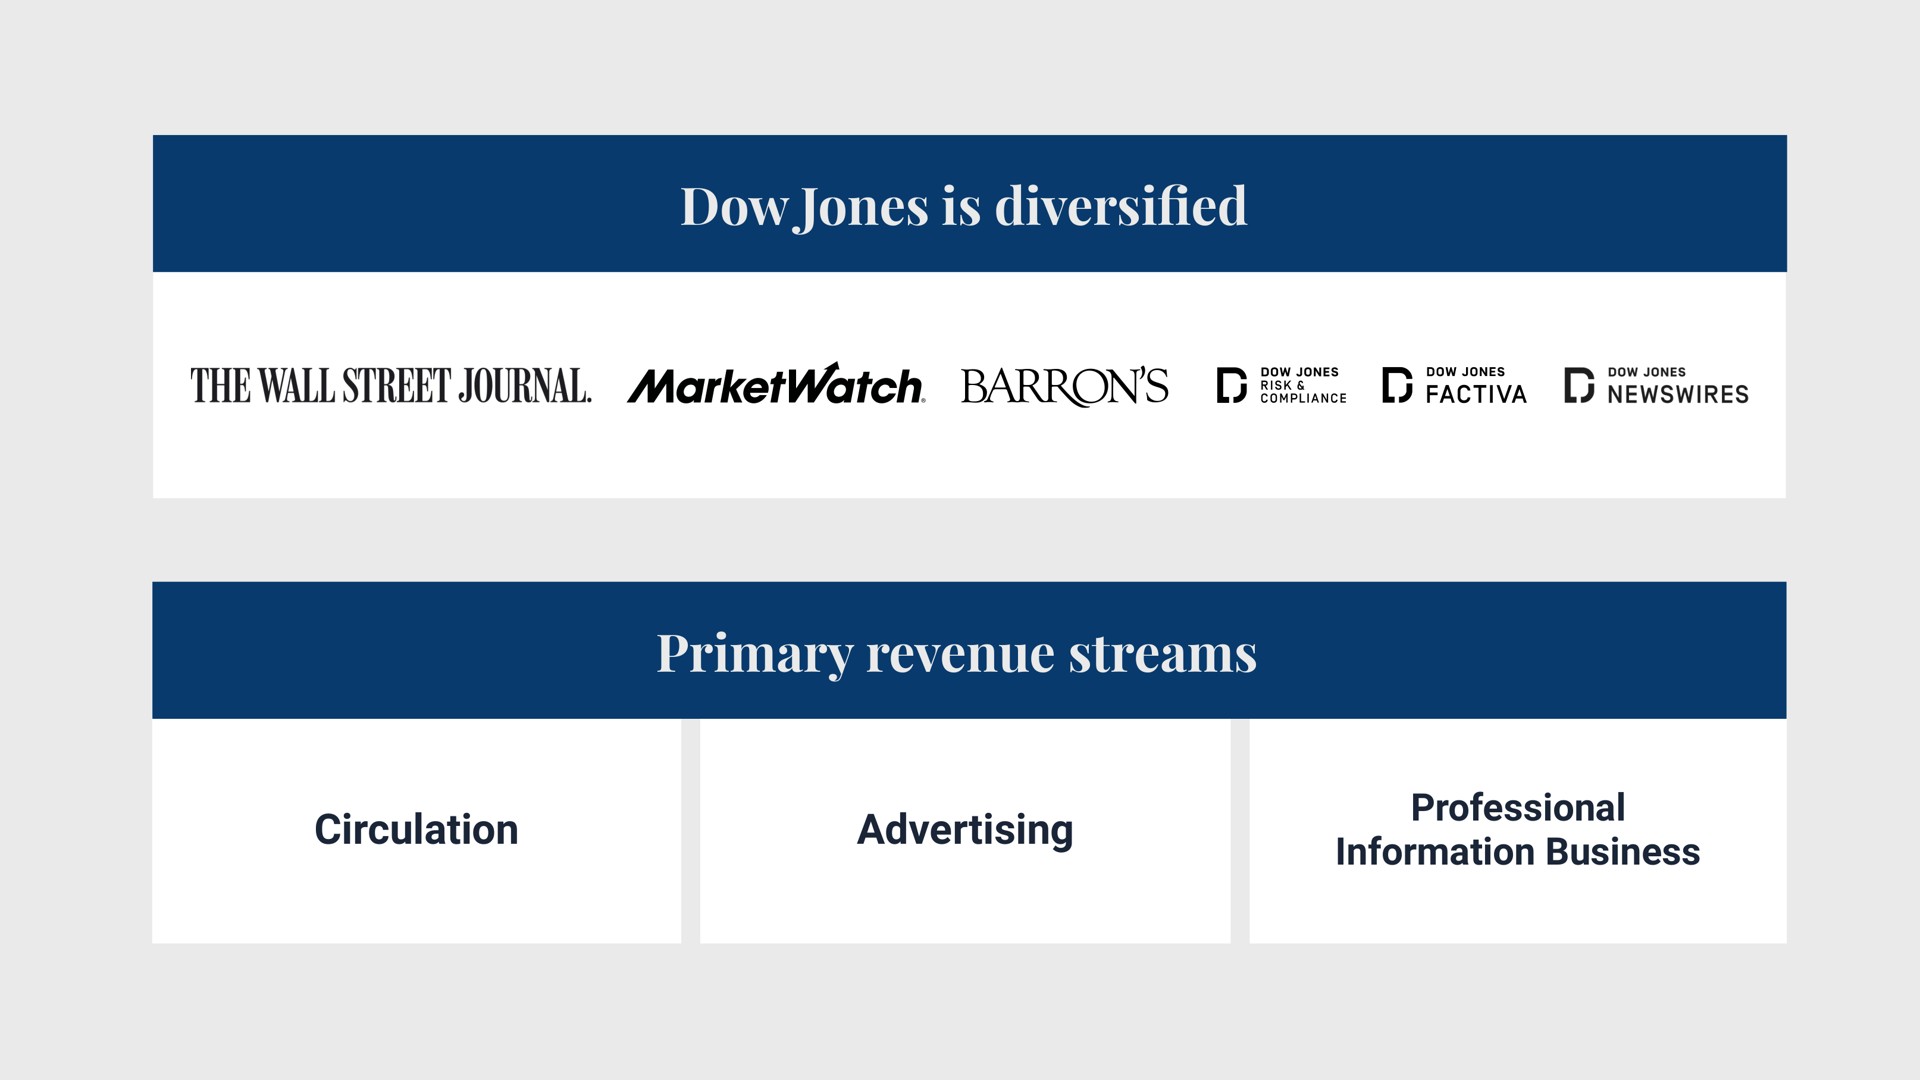 a the wall street journal primary revenue streams circulation advertising professional information business | Dow Jones